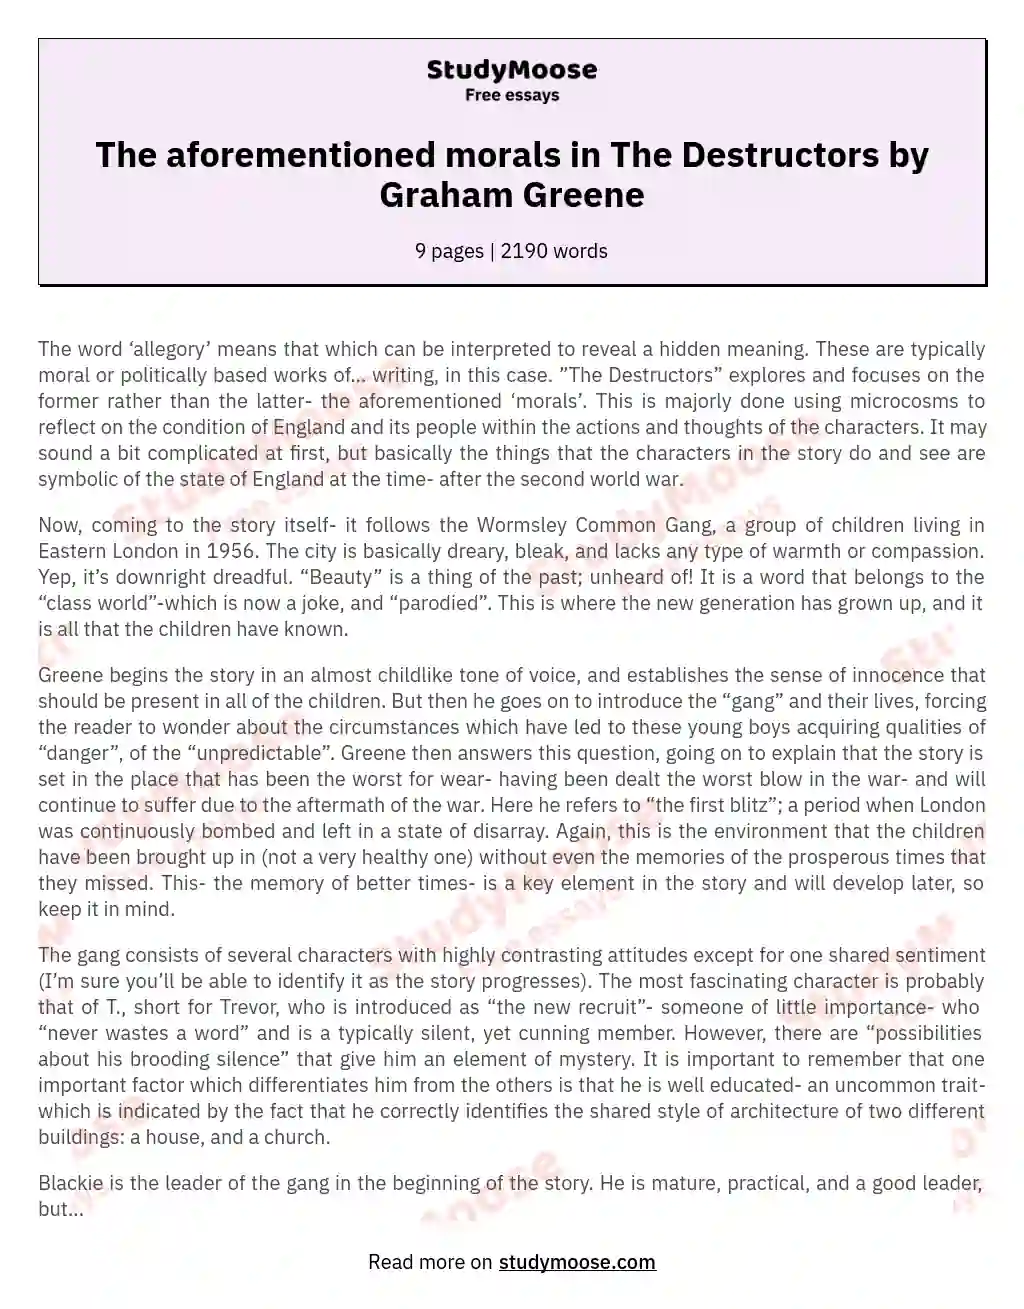 The aforementioned morals in The Destructors by Graham Greene essay